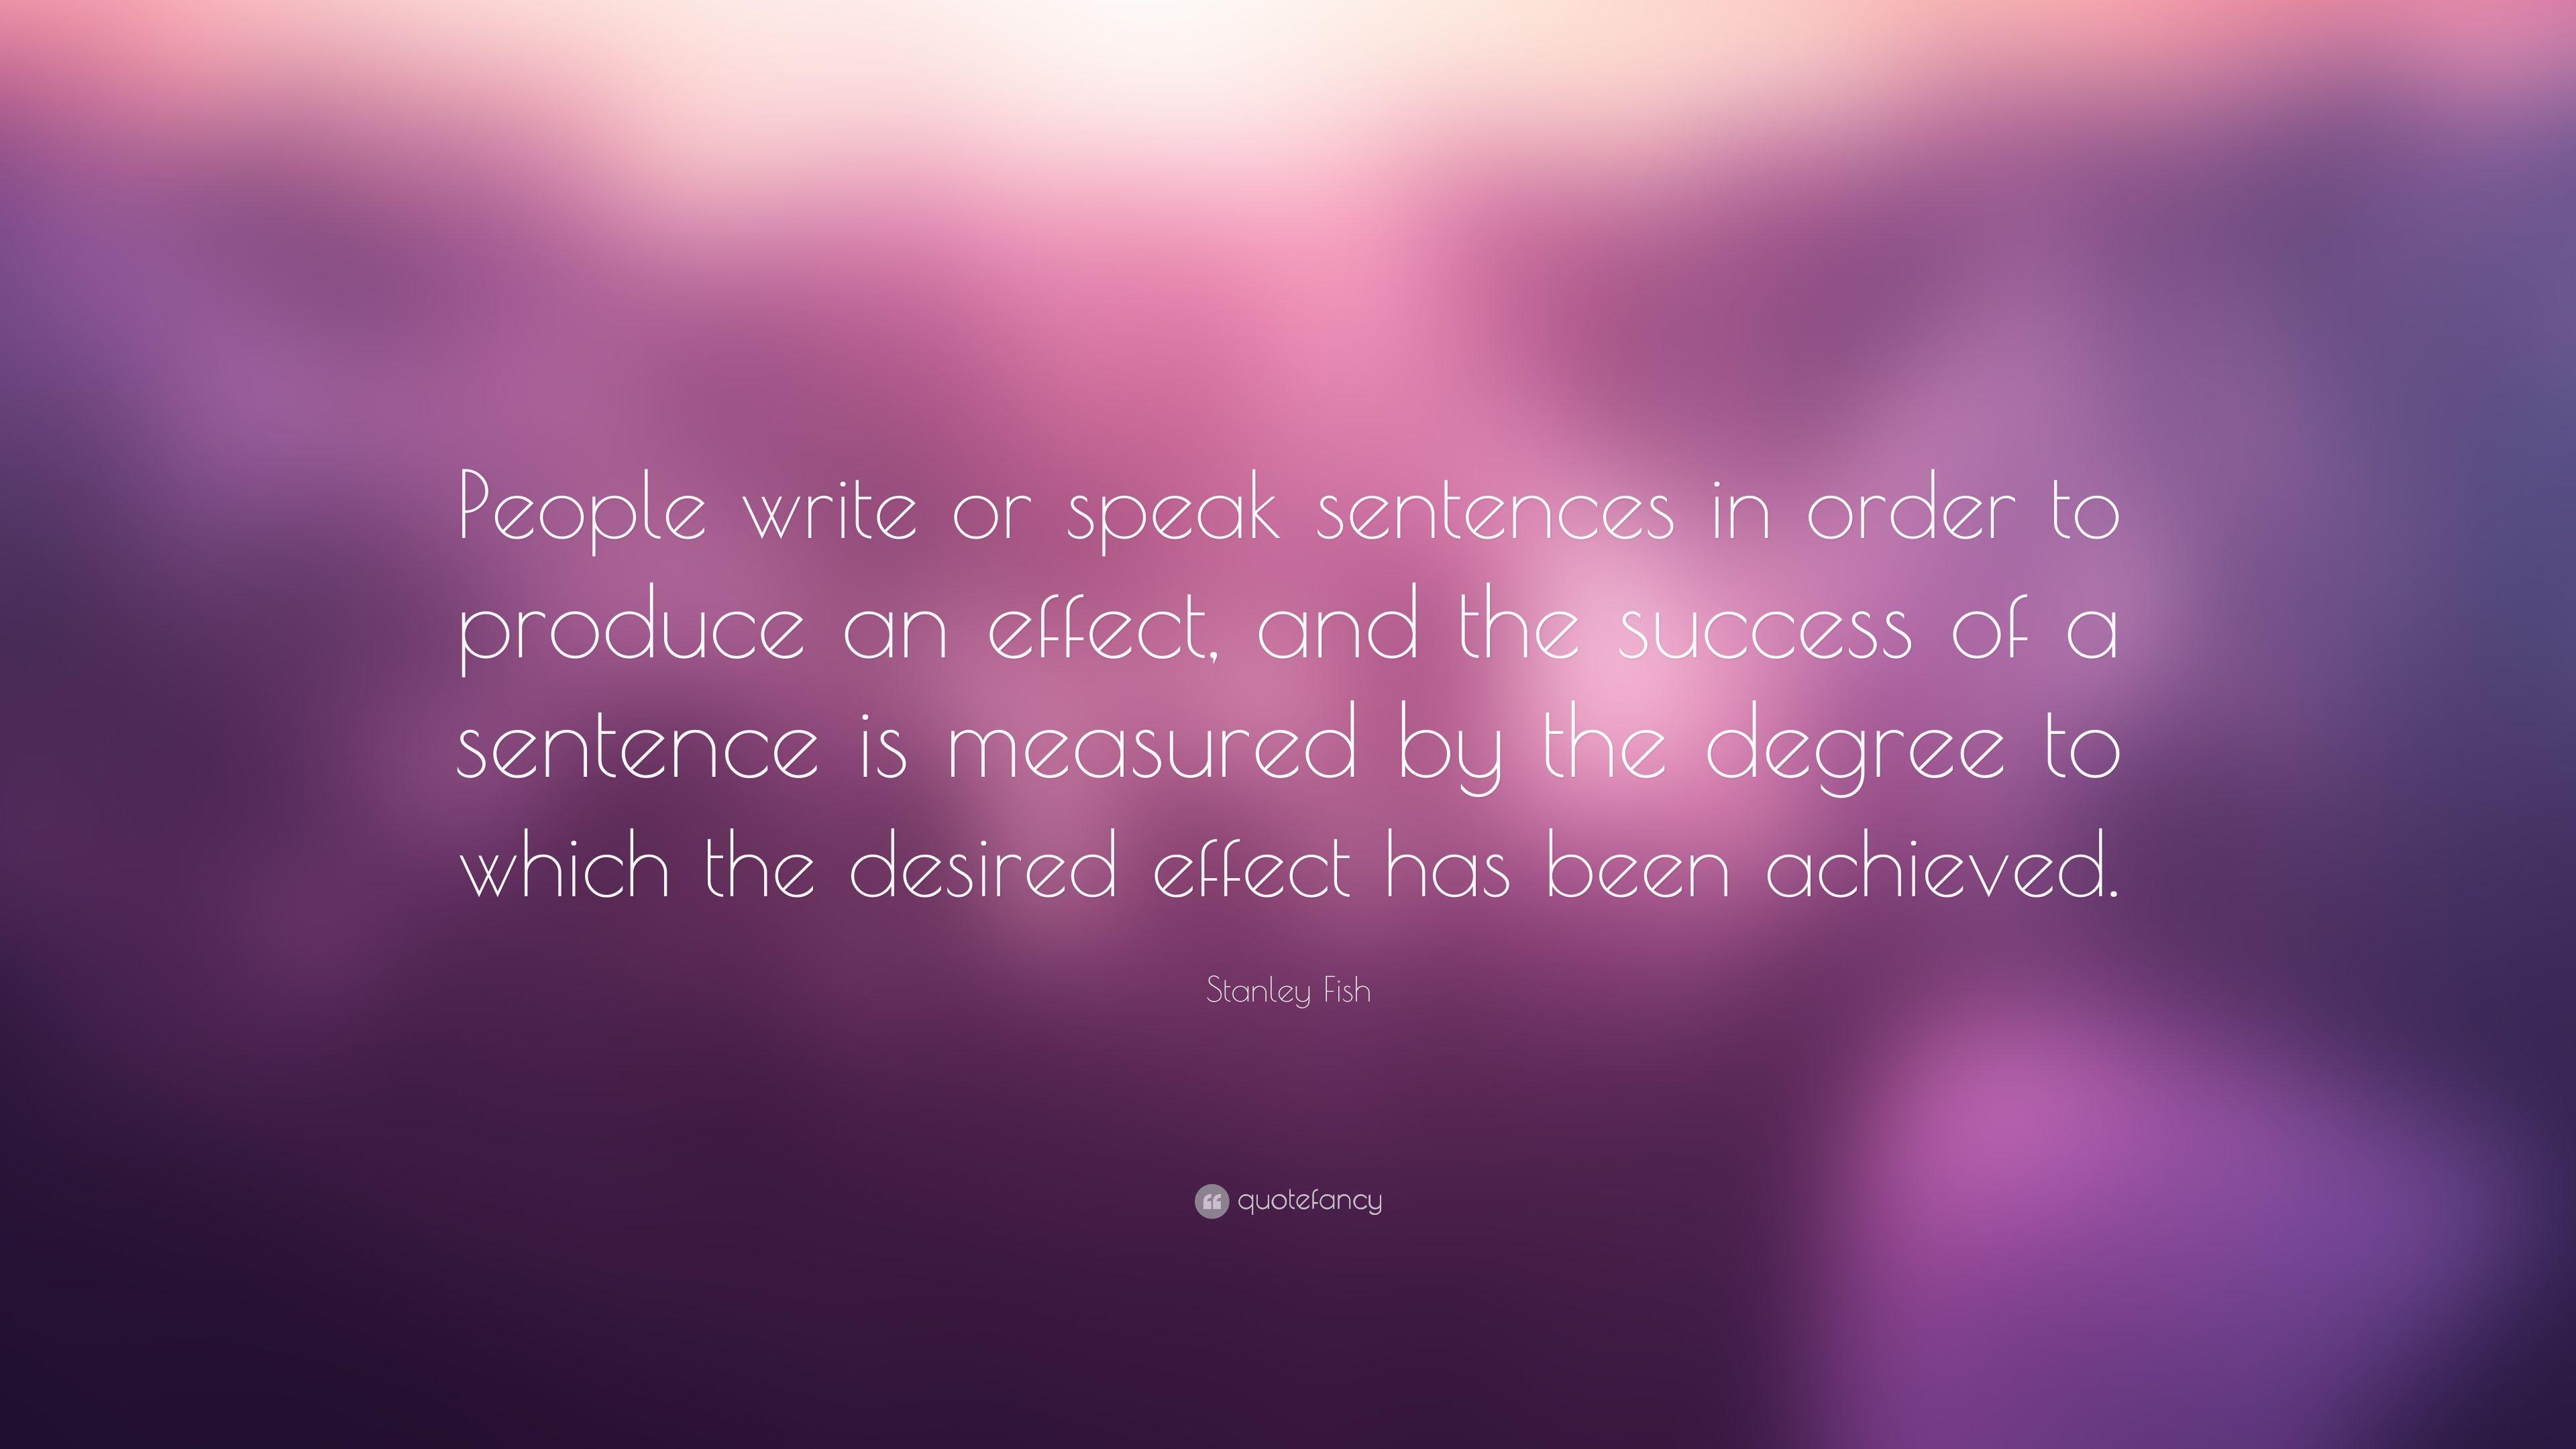 Stanley Fish Quote: “People write or speak sentences in order to